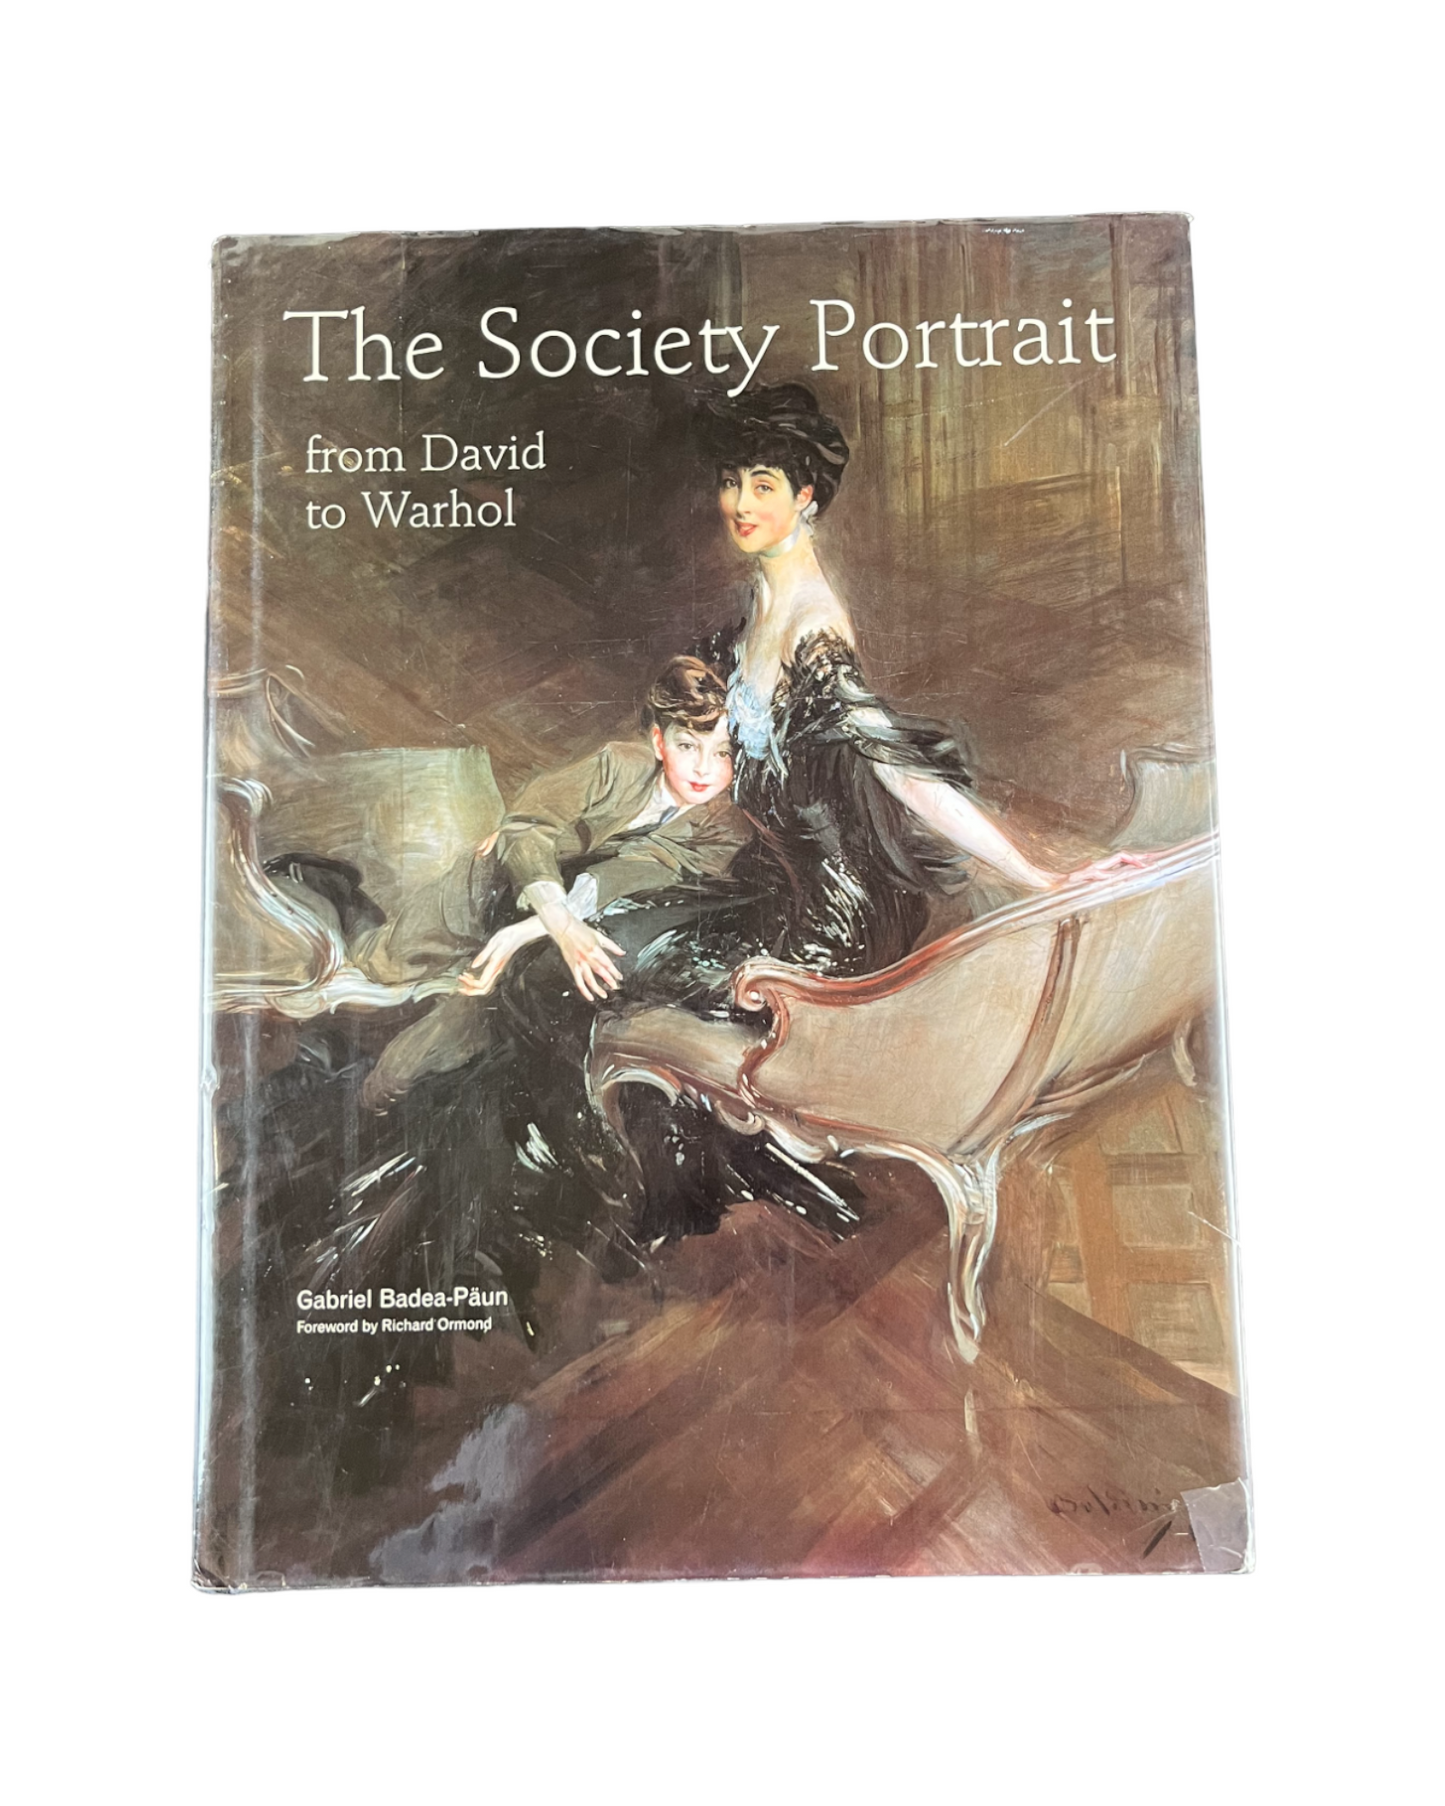 The Society Portrait from David to Warhol